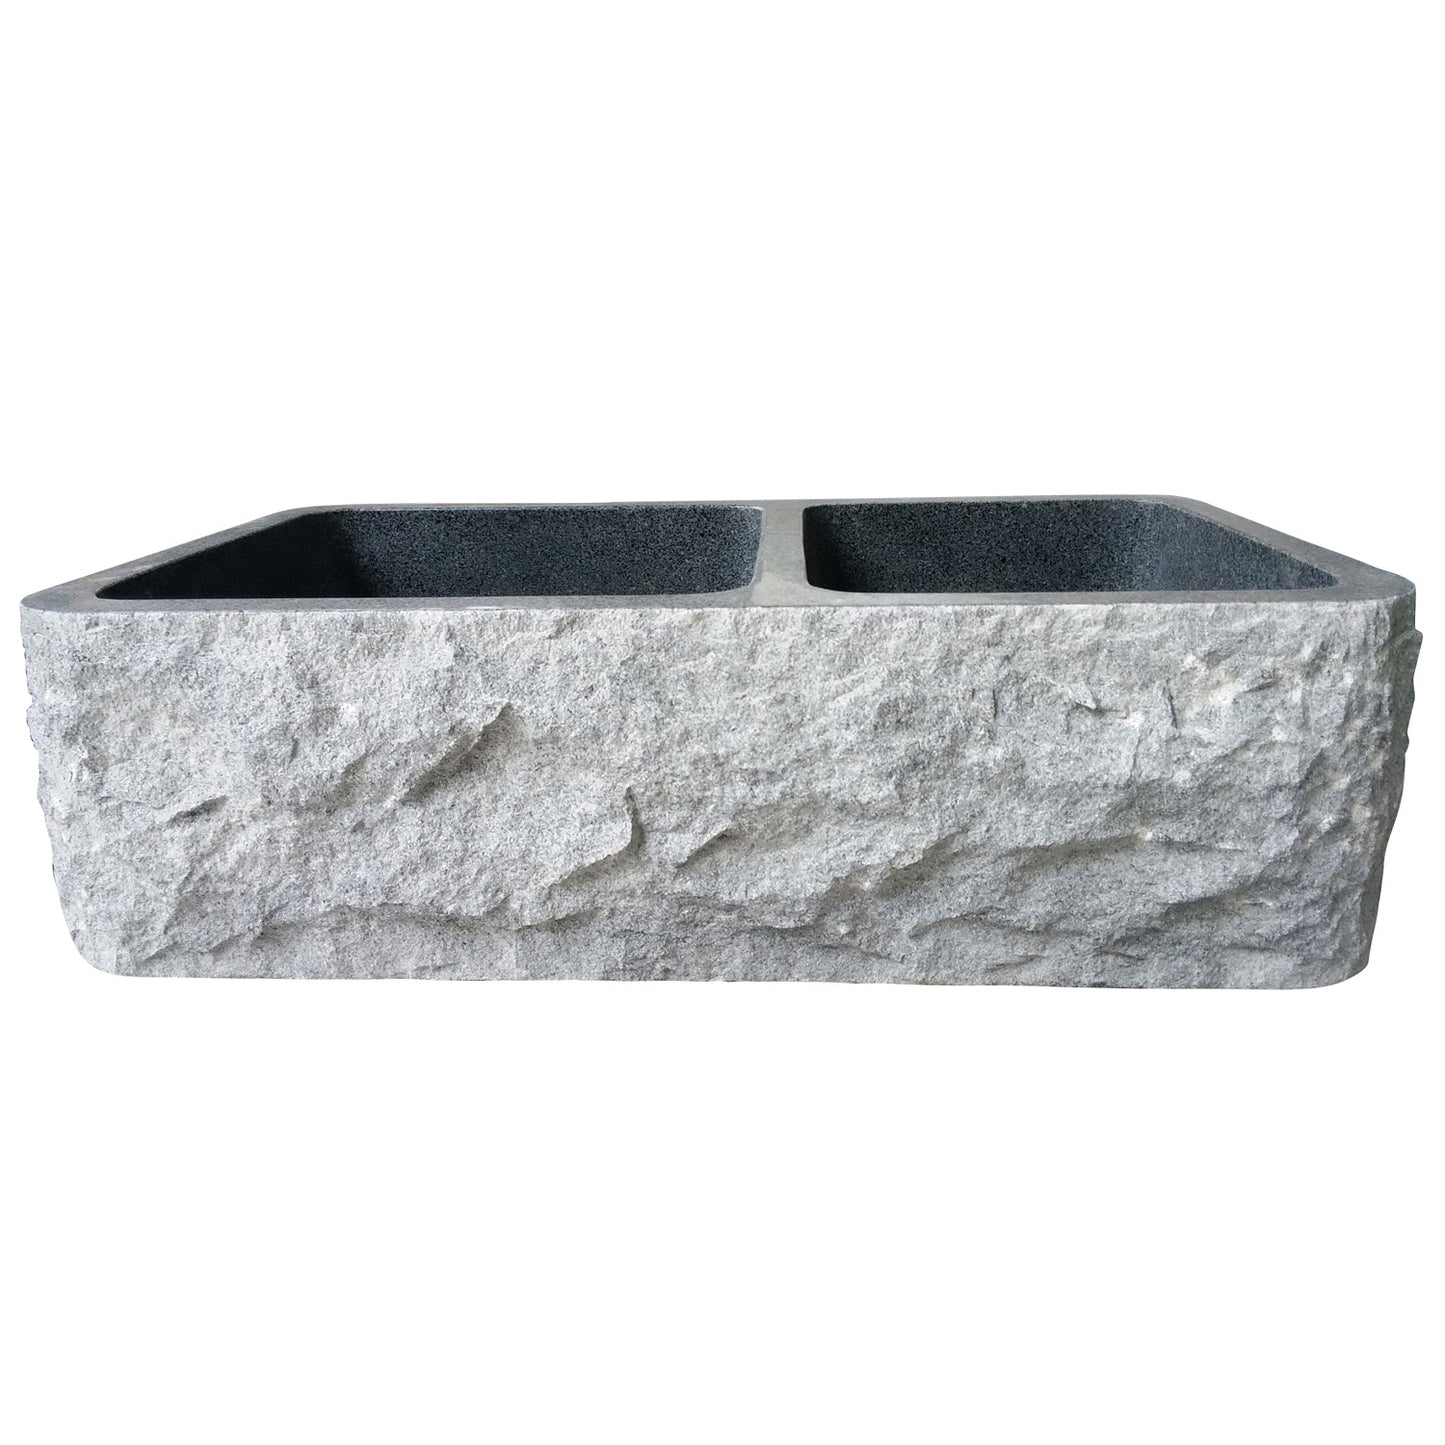 Brandi 36" Bue Grey Granite Double Bowl Apron Sink with Chiseled Front